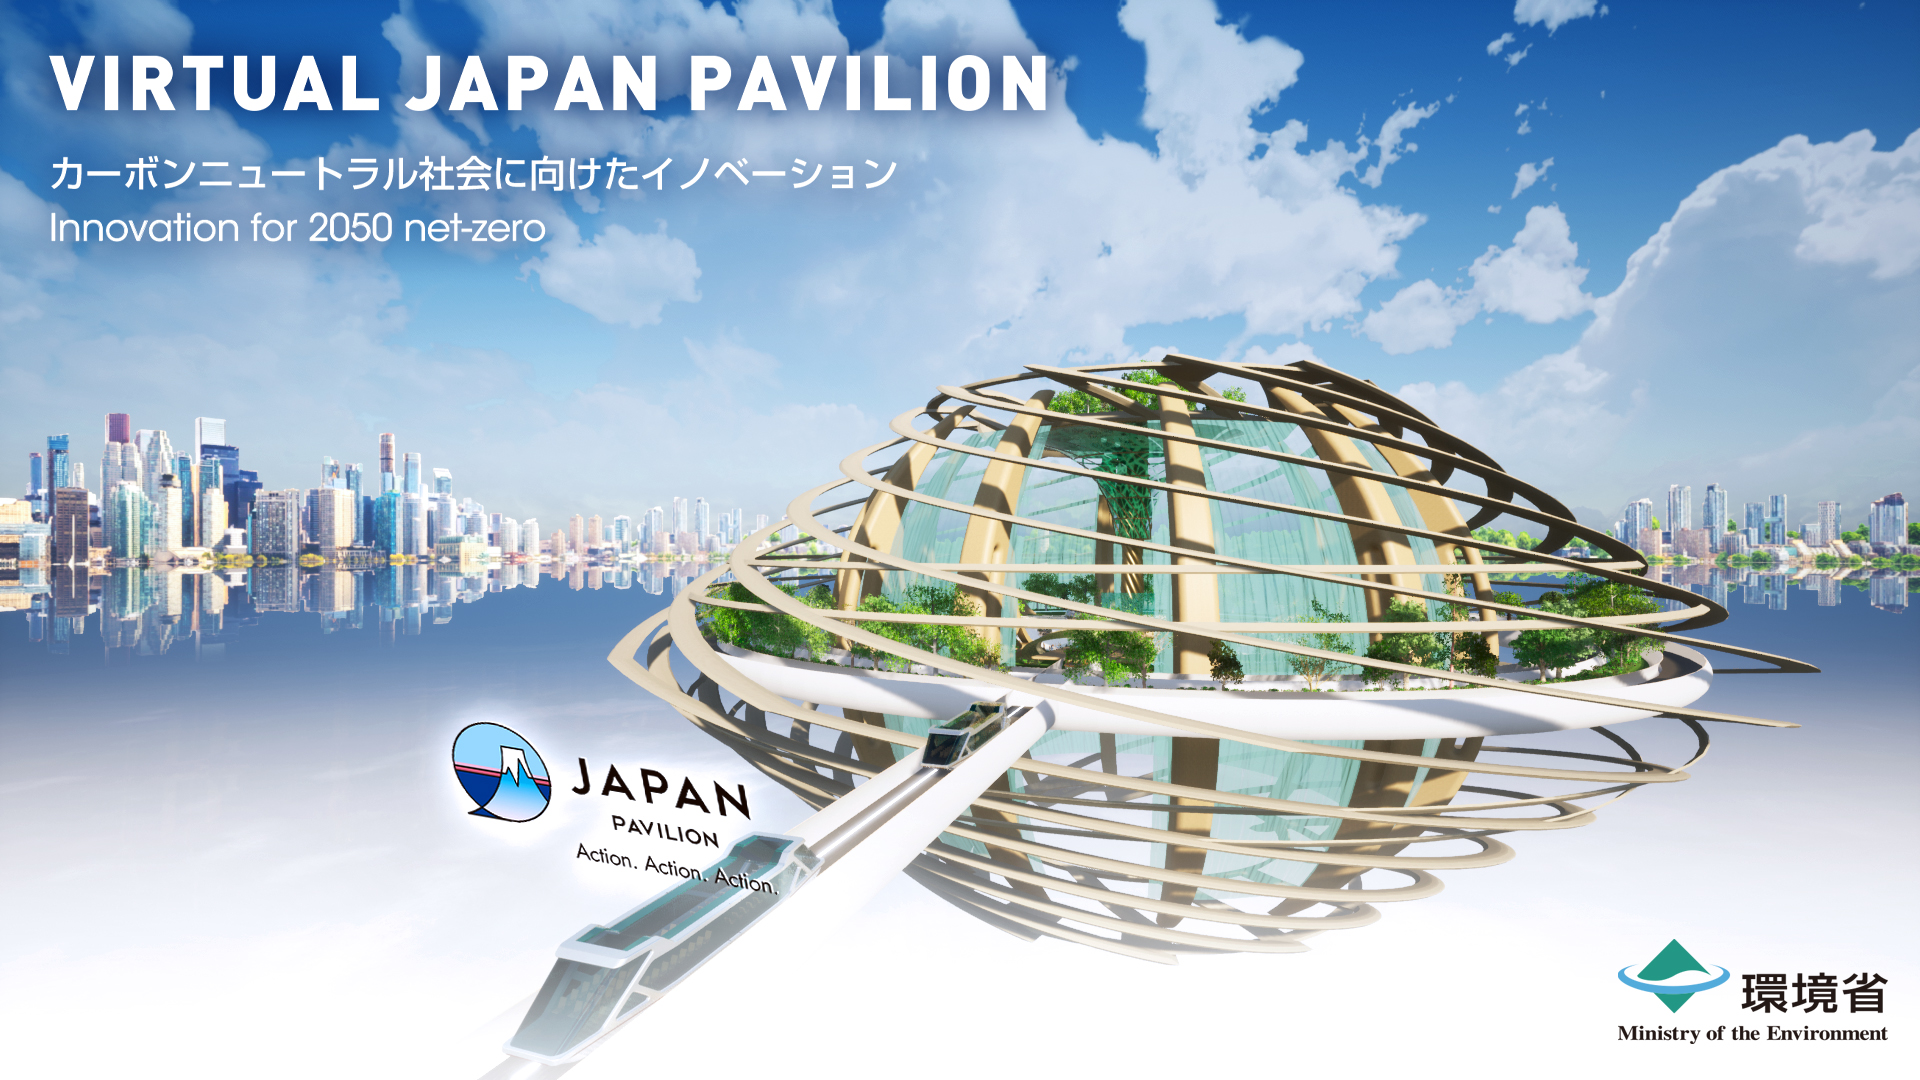 VIRTUAL JAPAN PAVILION カーボンニュートラル社会に向けたイノベーション Innovation for a carbon-neutral society